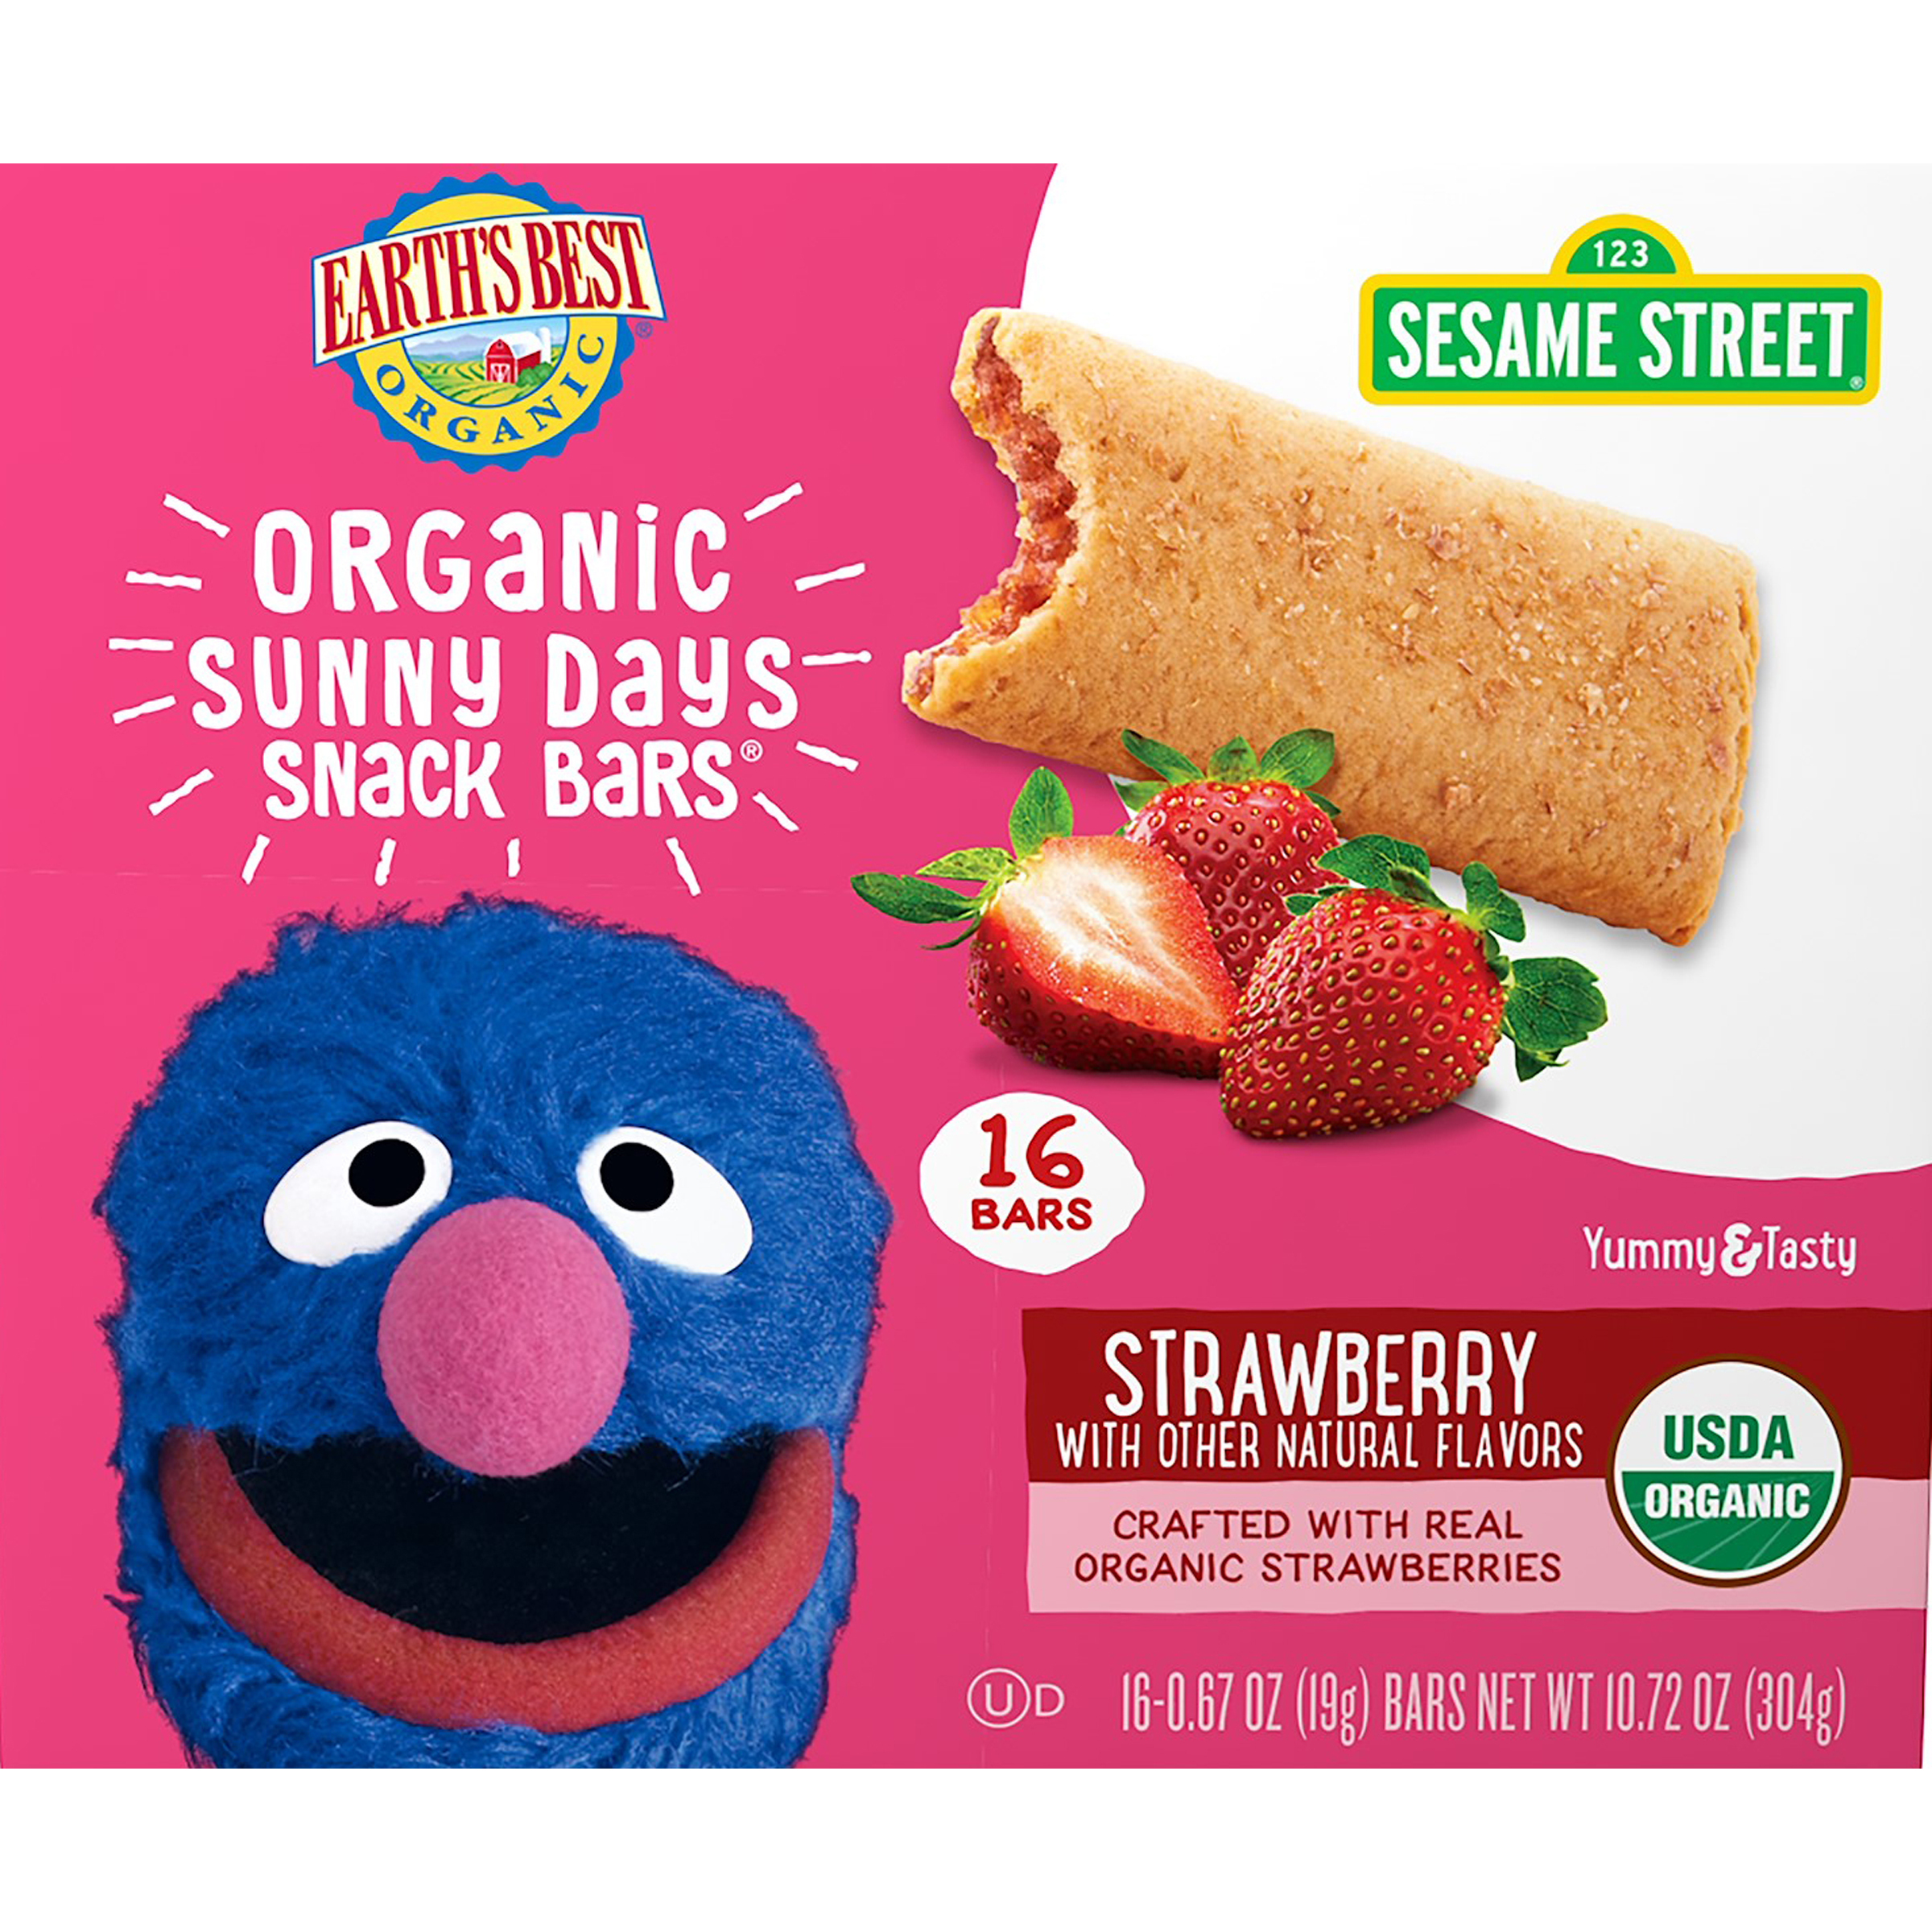 Earth's Best Organic Sesame Street Strawberry Sunny Days Snack Bars, 16 Count, 10.72 oz. Box - image 1 of 10